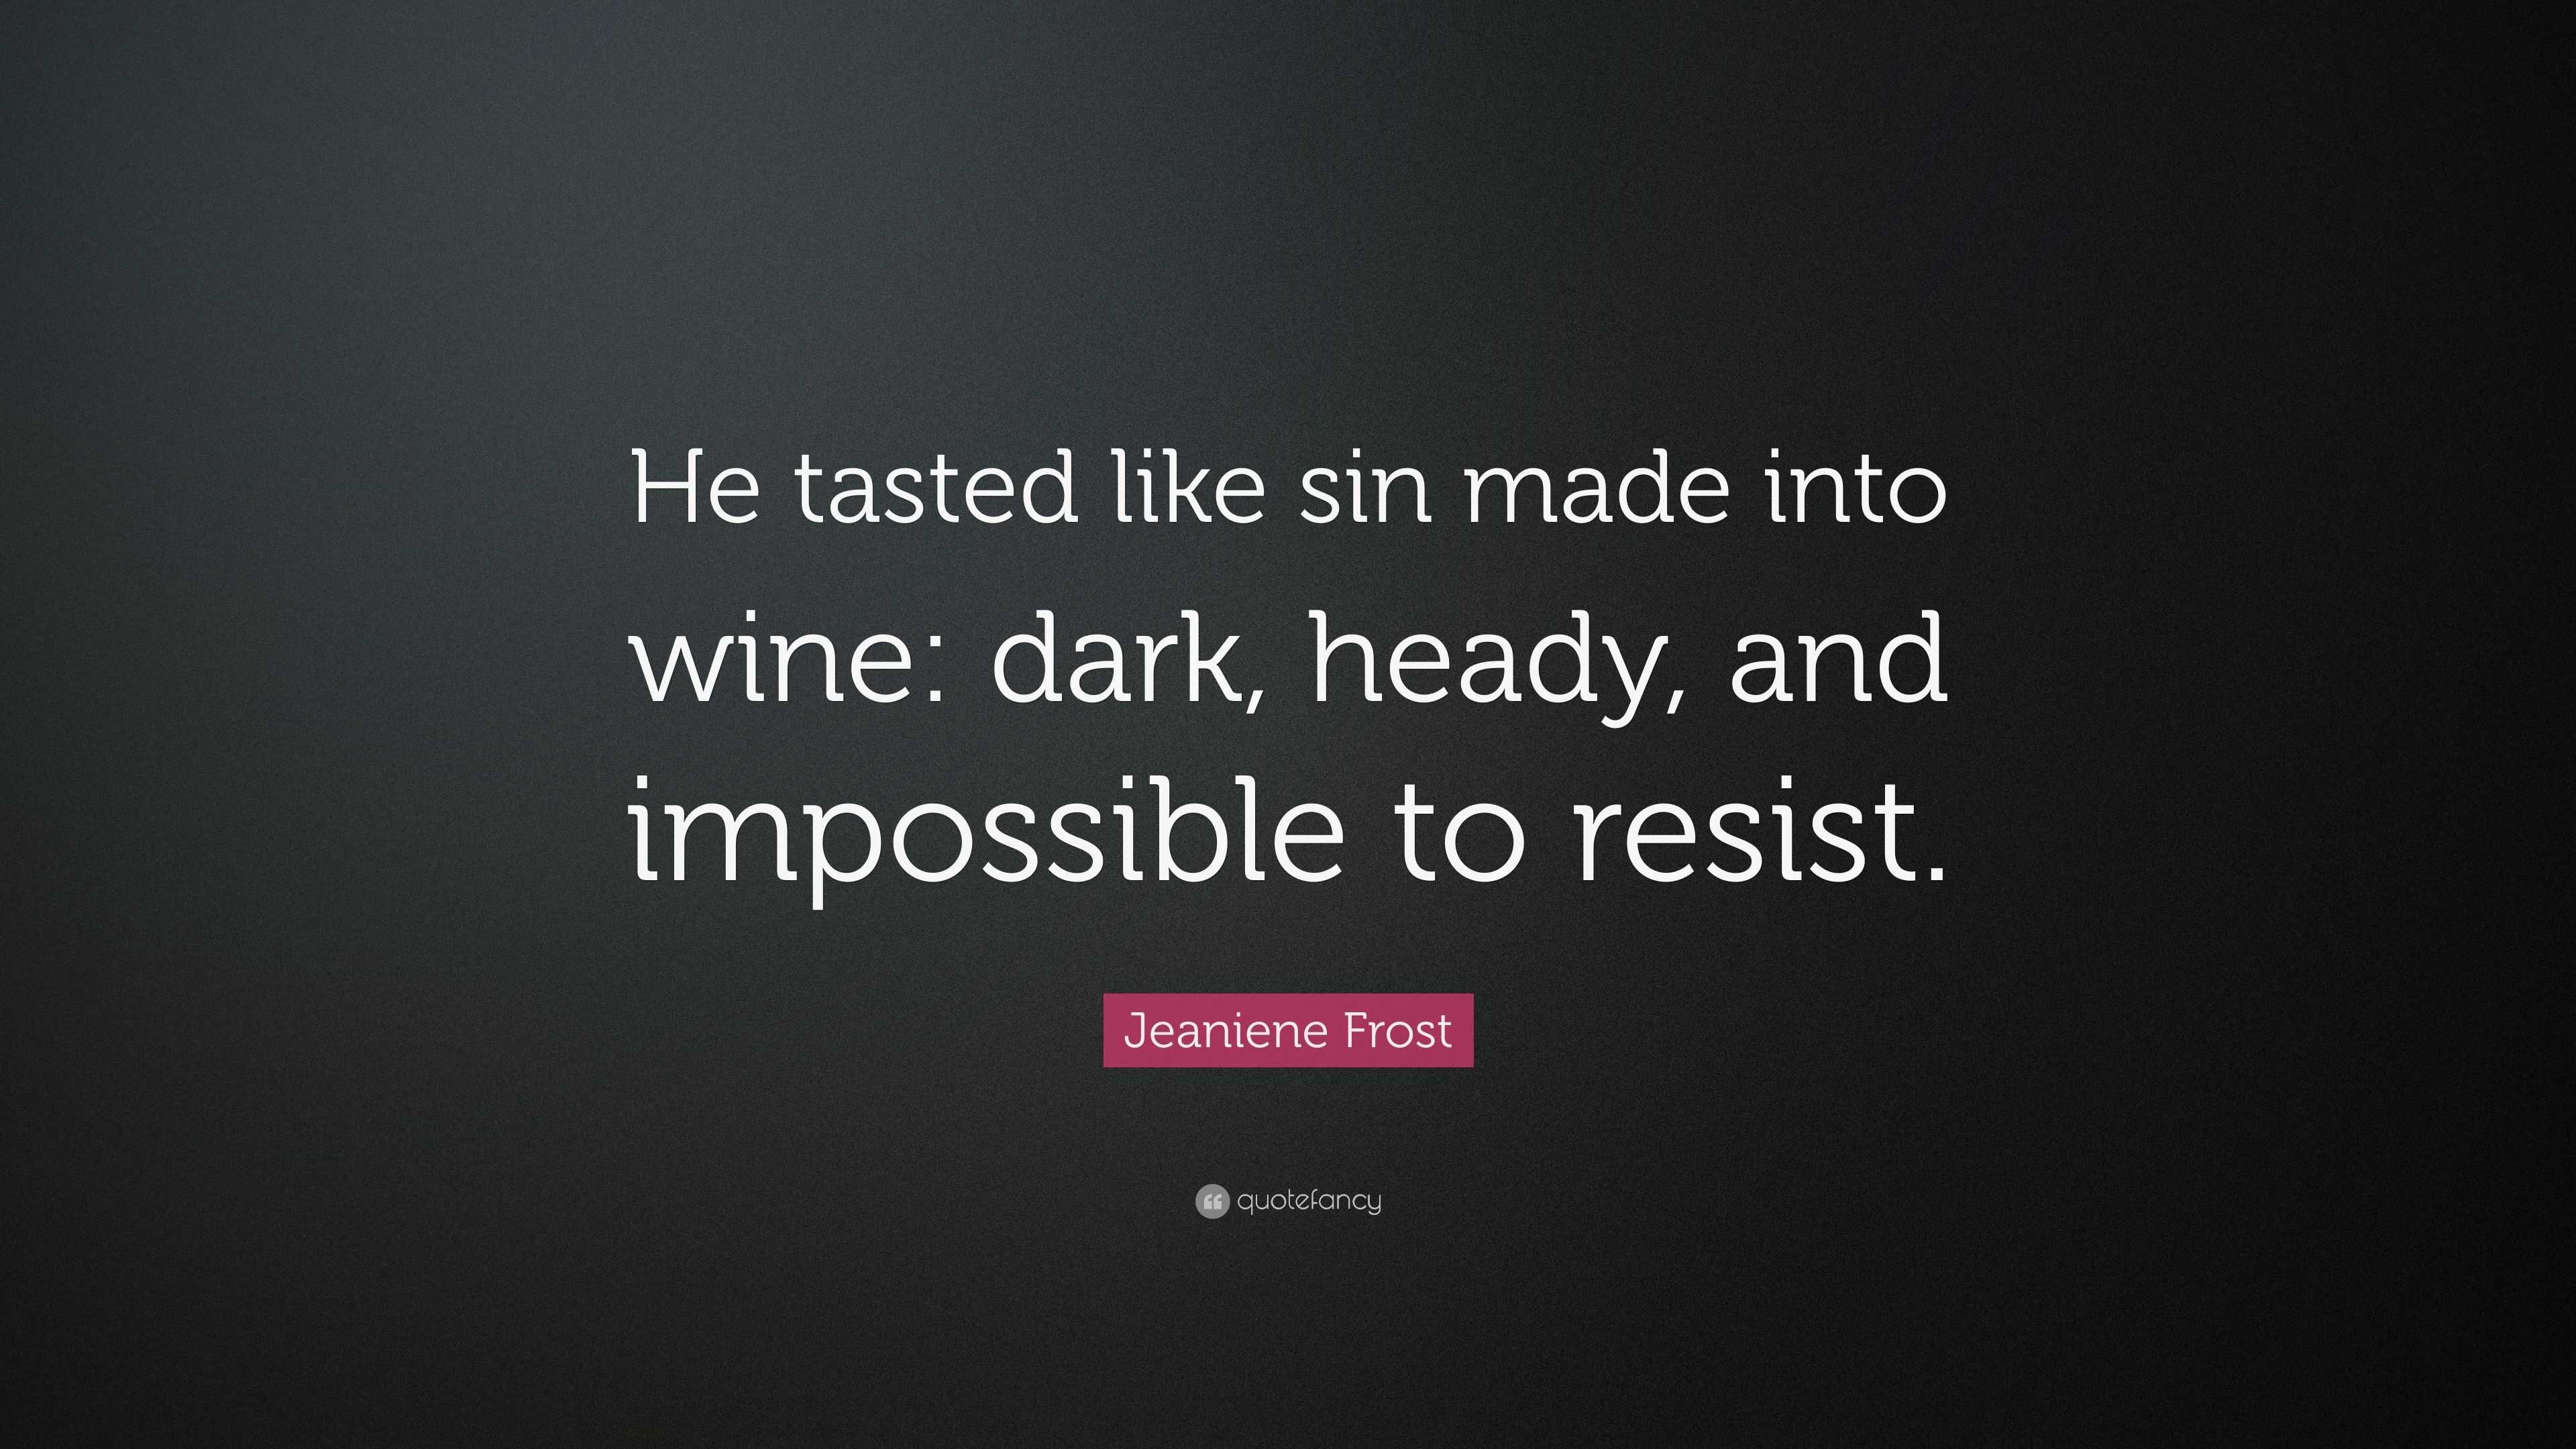 Jeaniene Frost Quote: “He tasted like sin made into wine: dark